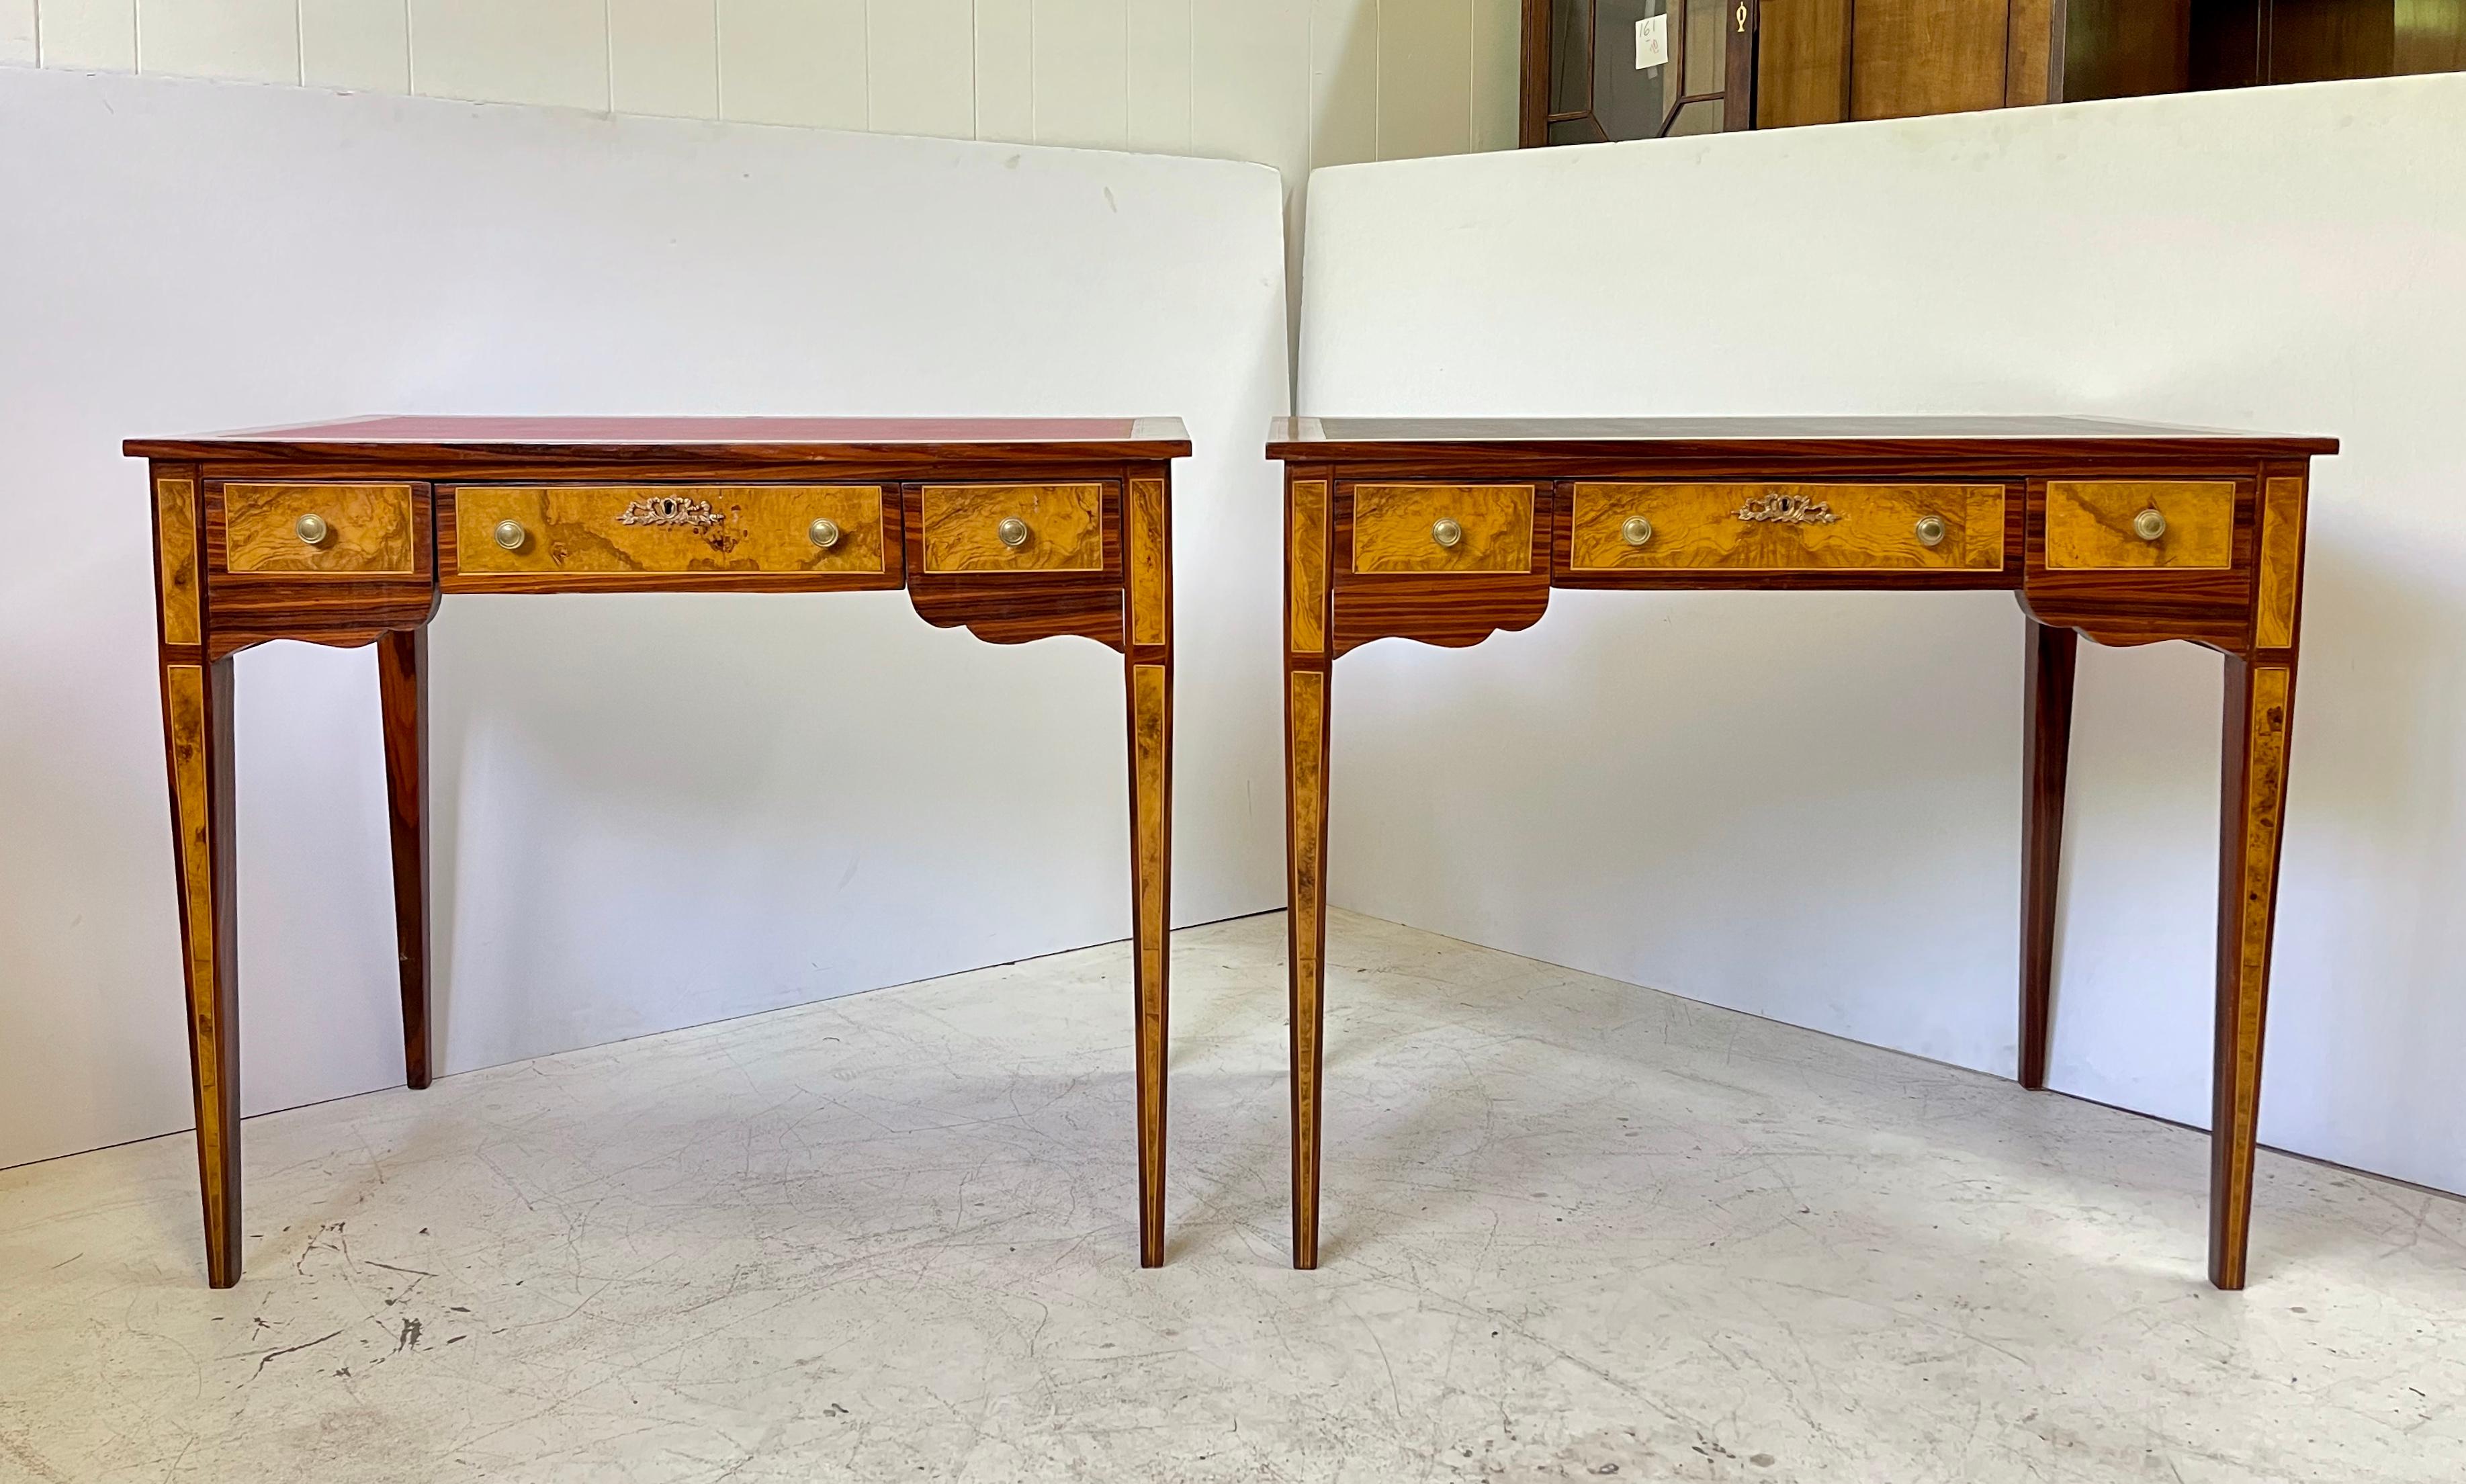 Fabulous and intricate pair of 20th century neoclassical writing desks or side tables styled in burl wood veneers and string inlays. Each has a tooled and inset leather top over a frieze holding three drawers with brass knobs and a scalloped apron.